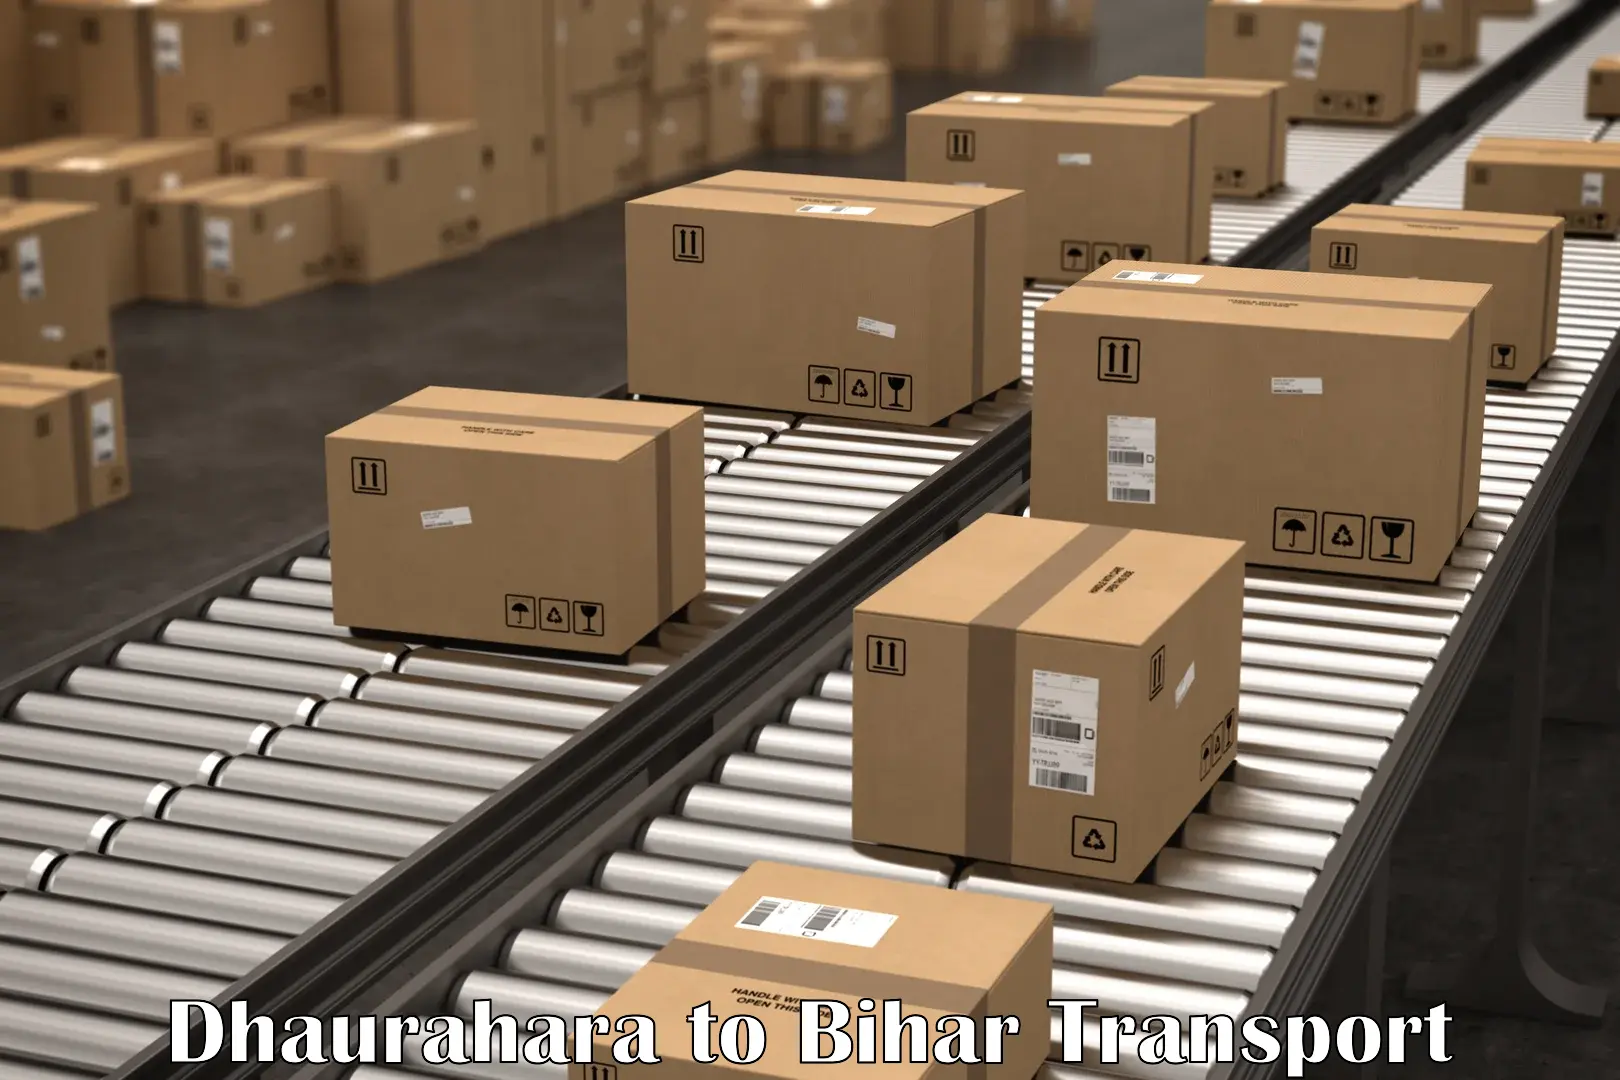 Road transport services in Dhaurahara to Bihar